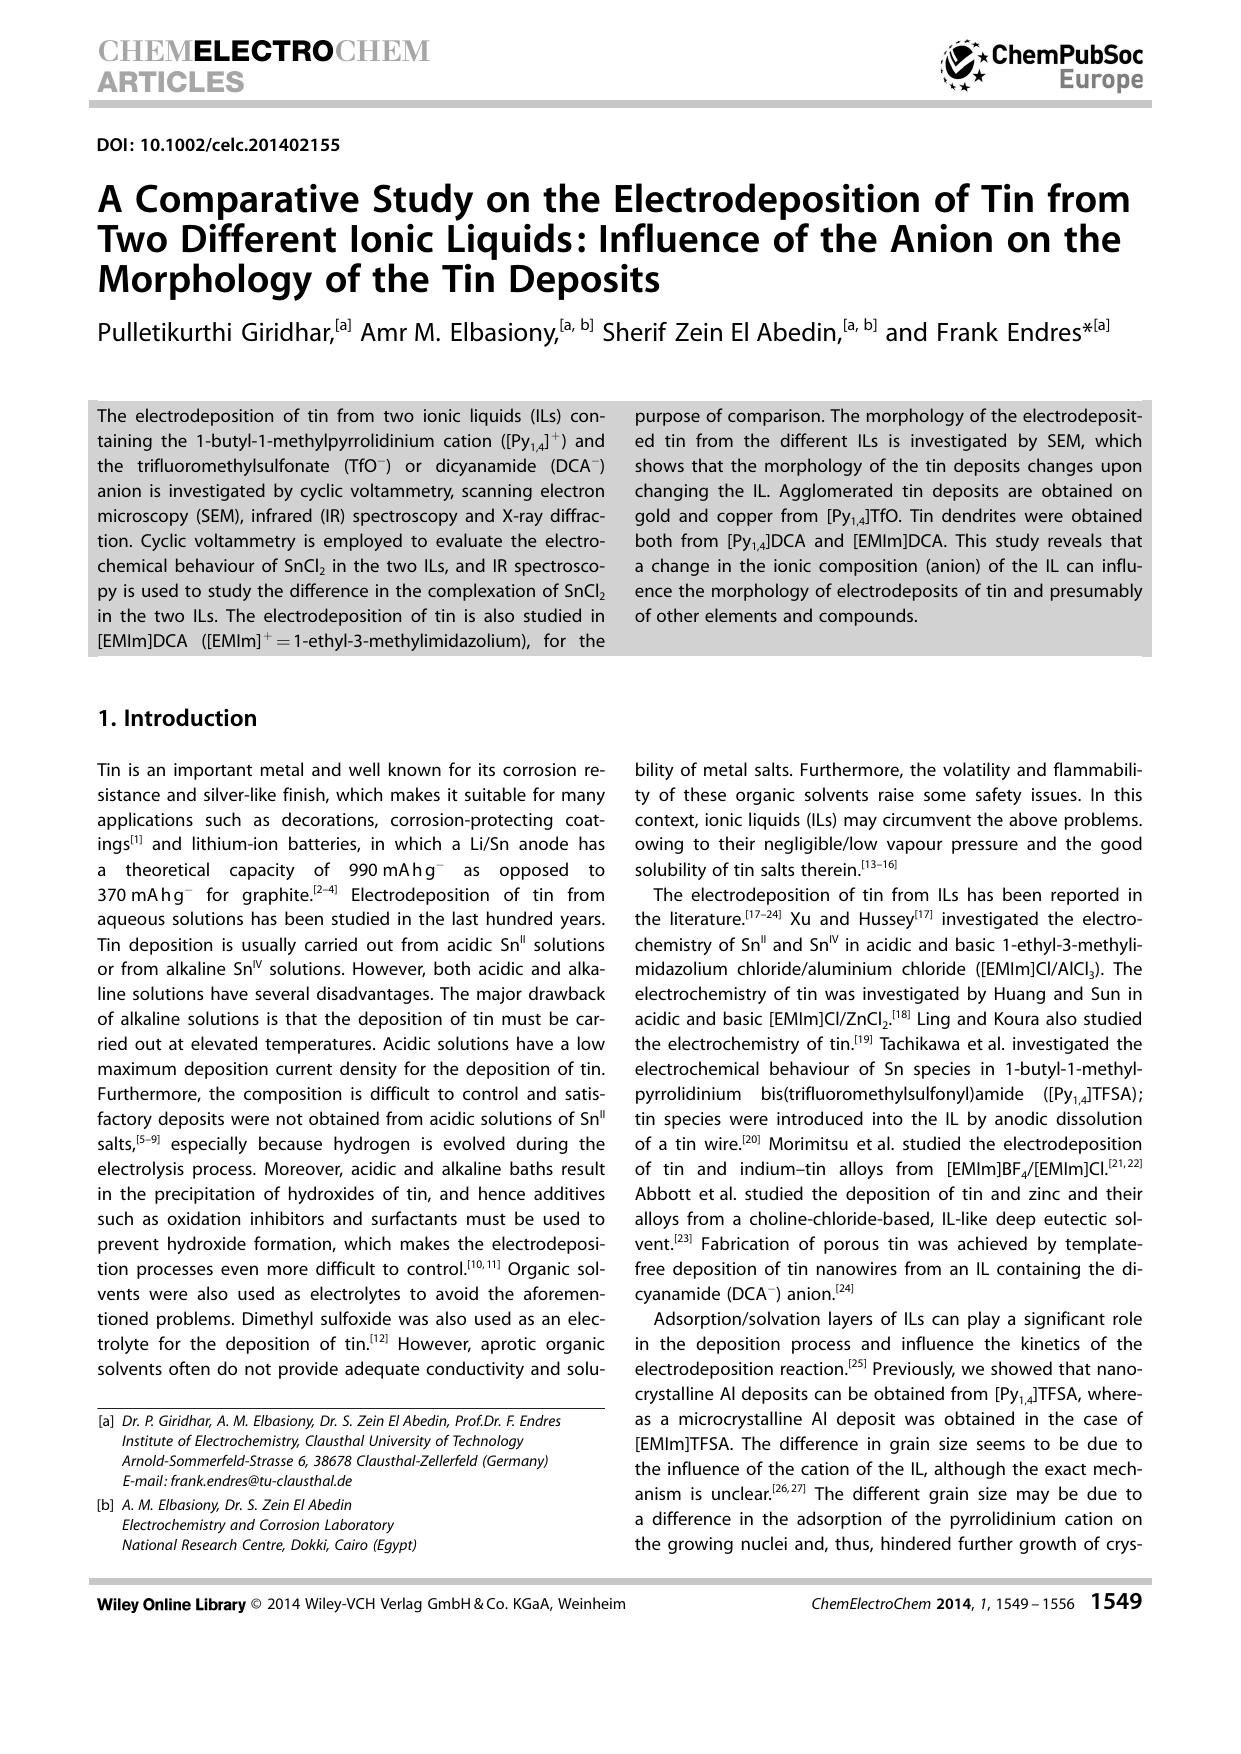 A Comparative Study on the Electrodeposition of Tin from Two Different Ionic Liquids: Influence of the Anion on the Morphology of the Tin Deposits by Unknown